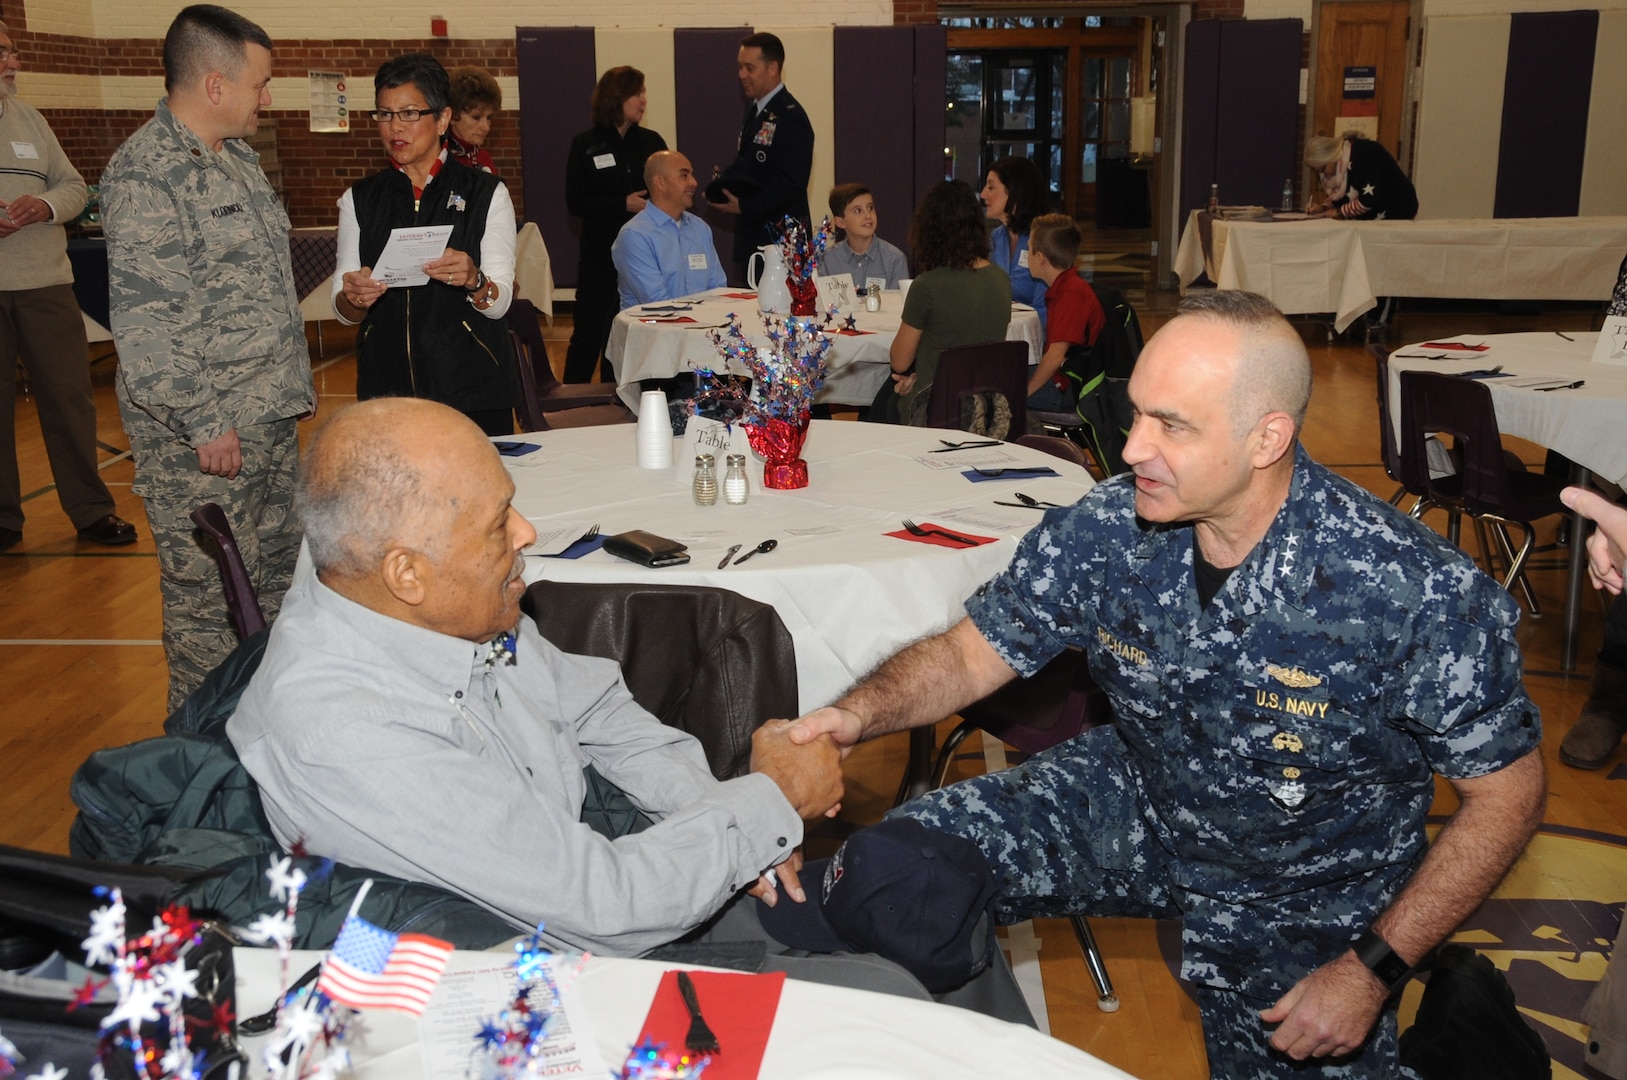 U.S. Navy Vice Adm. Charles Richard, deputy commander of U.S. Strategic Command (USSTRATCOM), speaks with a veteran before the 2017 Bellevue Veterans Day Parade in Bellevue, Neb., Nov. 11, 2017. Senior leaders from USSTRATCOM and the 55th Wing participated in several Veterans Day events throughout the Omaha area to honor the service and sacrifice of American veterans and their families.